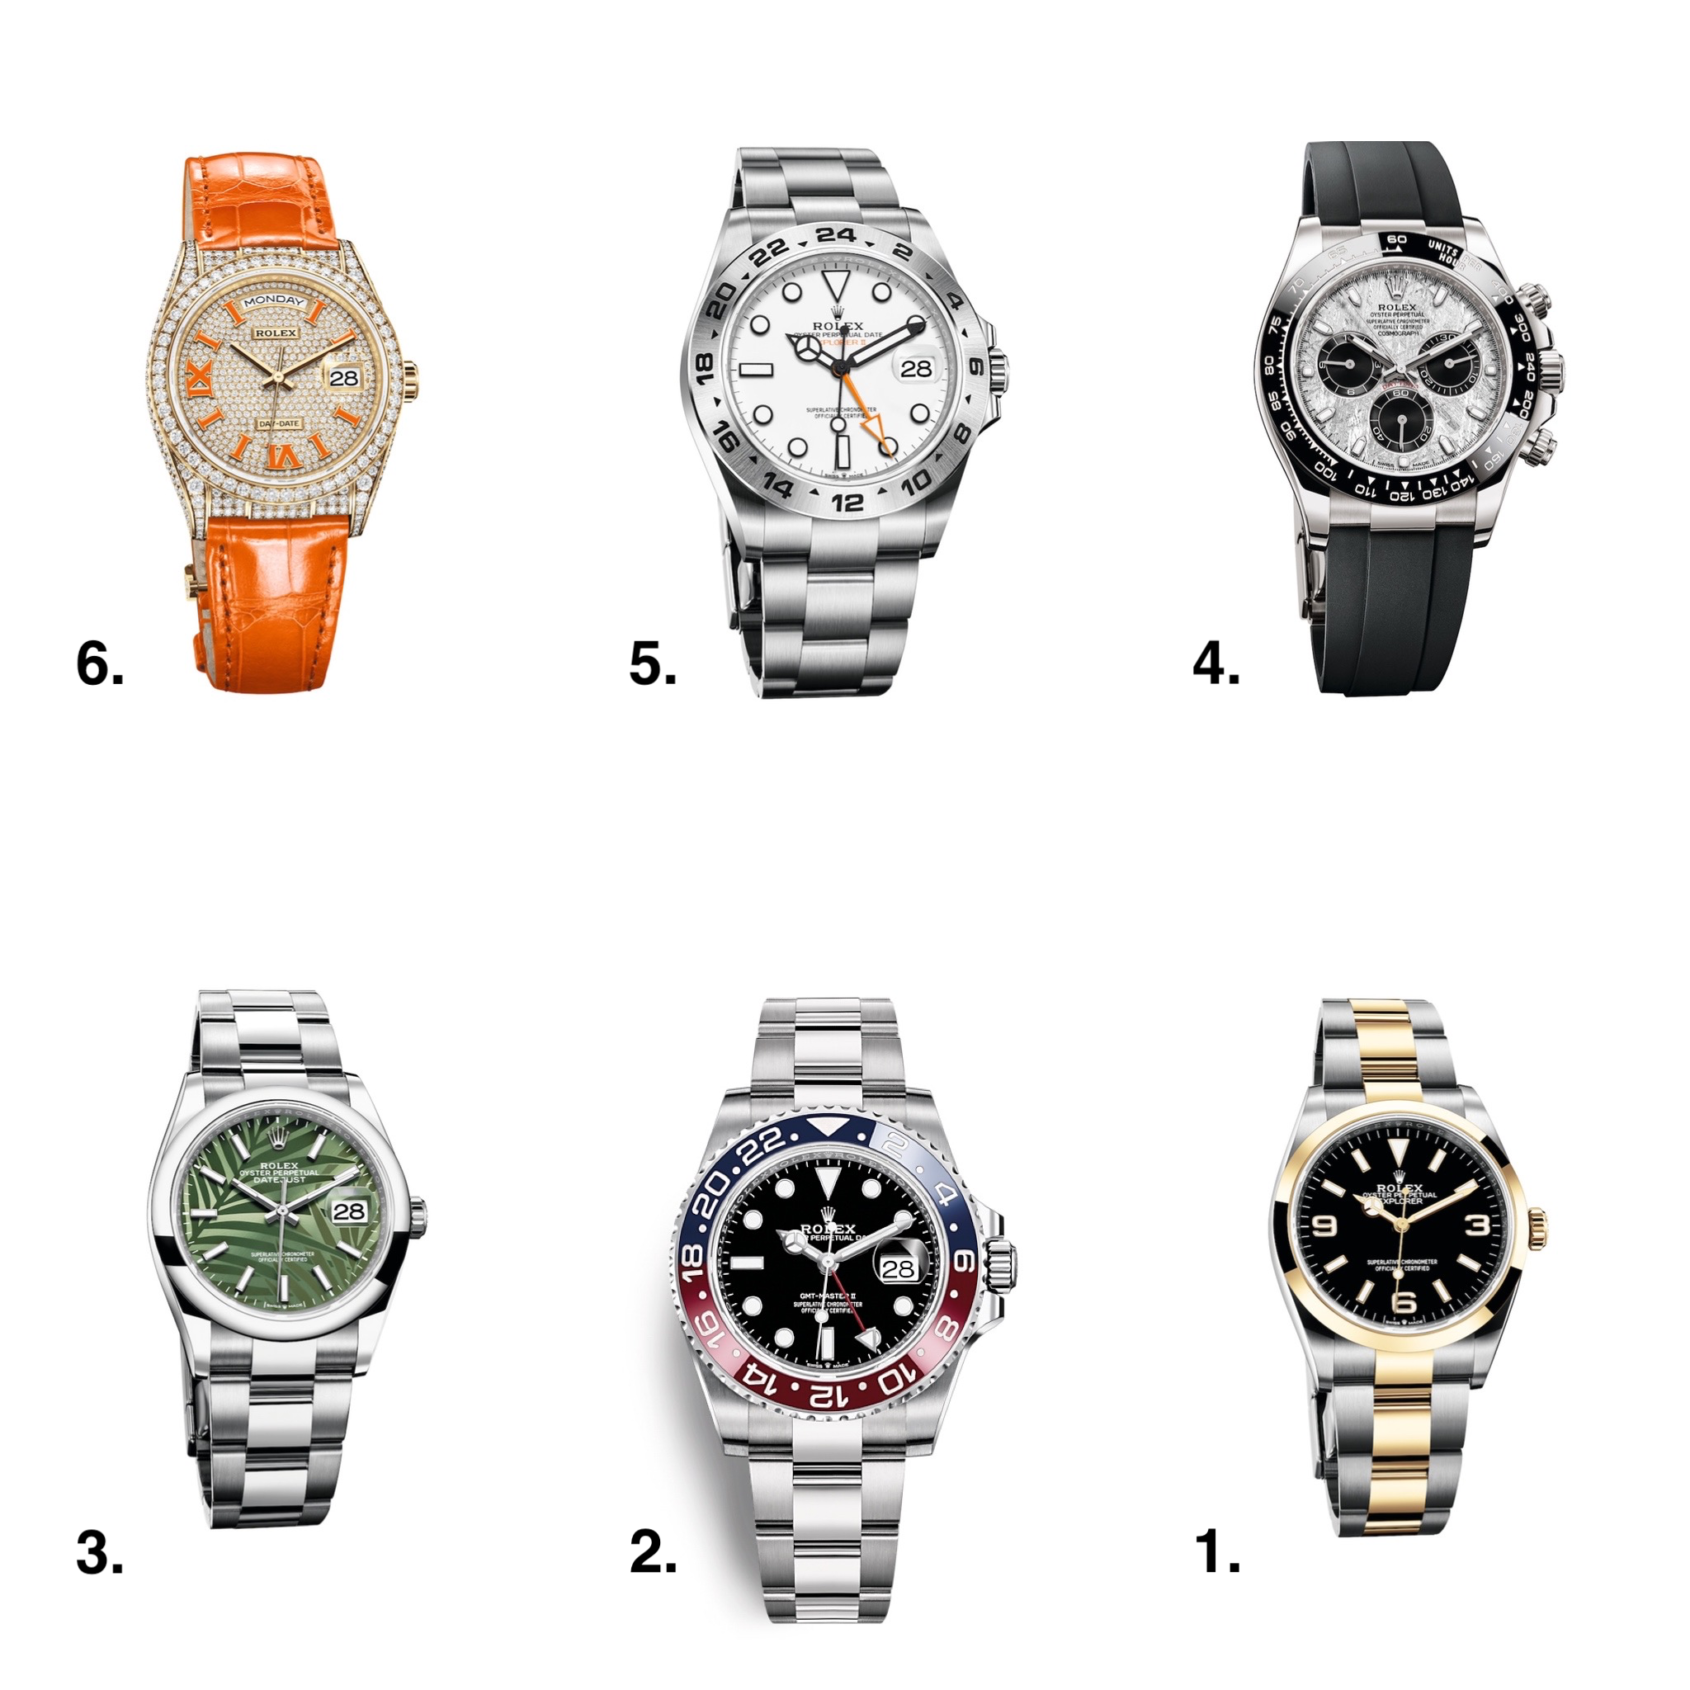 Sinewi grammatik Jeg spiser morgenmad The 2021 Rolex Collection ranked from least to most surprising